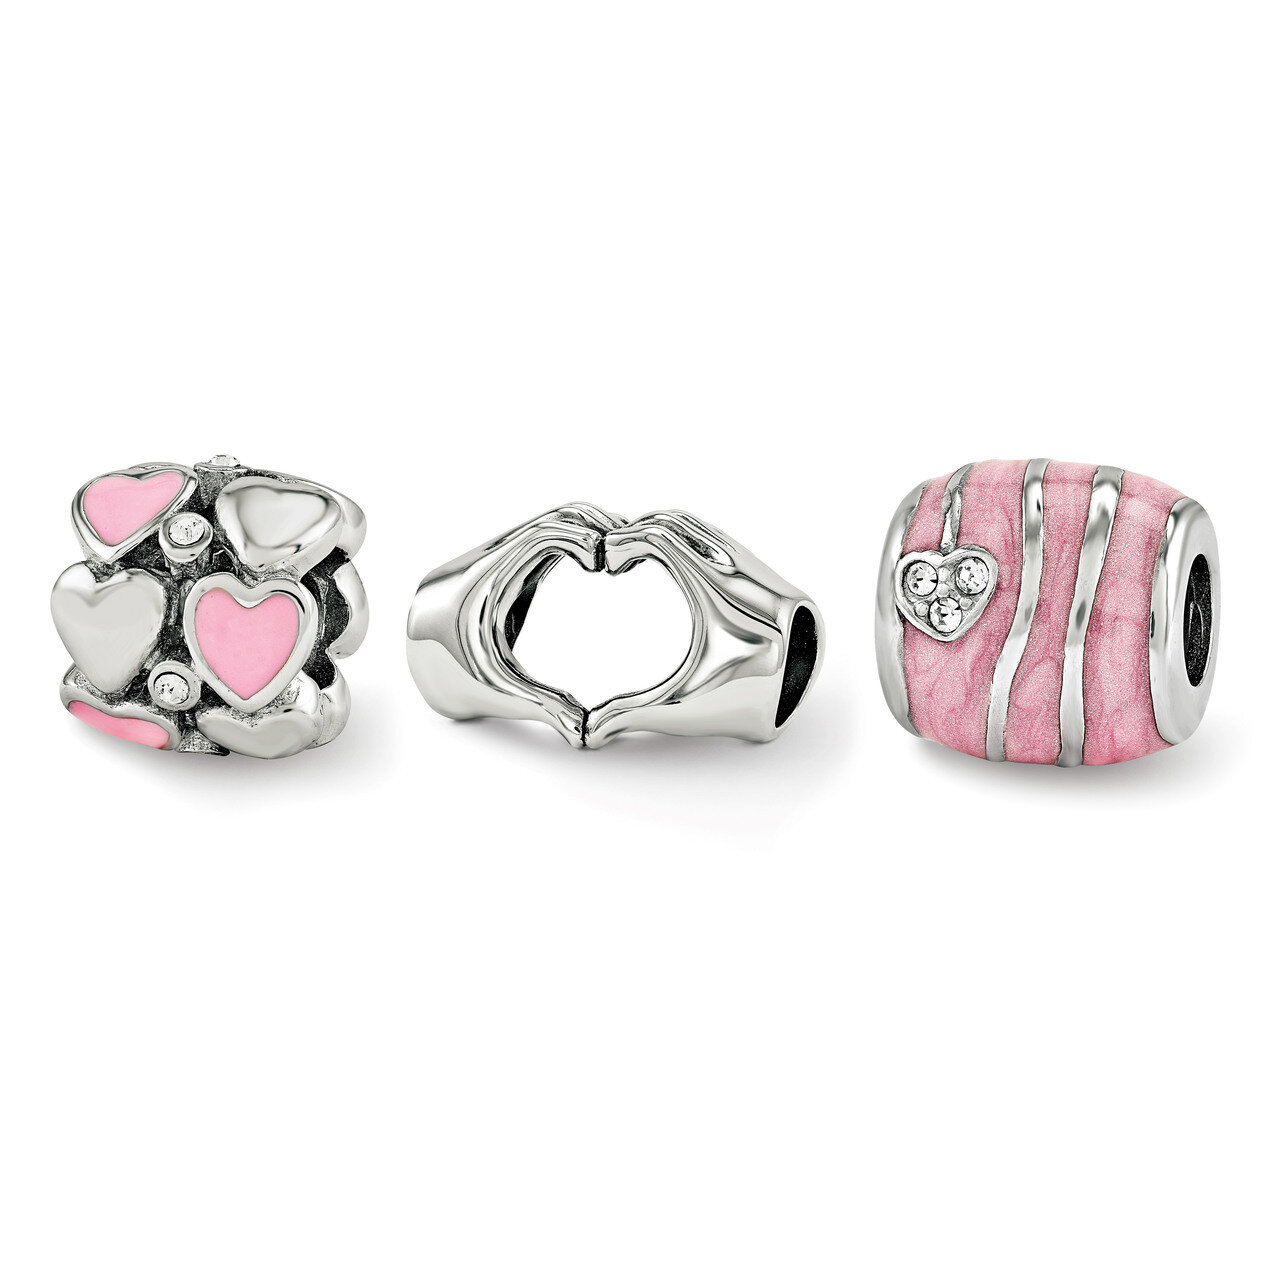 Hearts of Love Boxed Bead Set Sterling Silver QRSET138